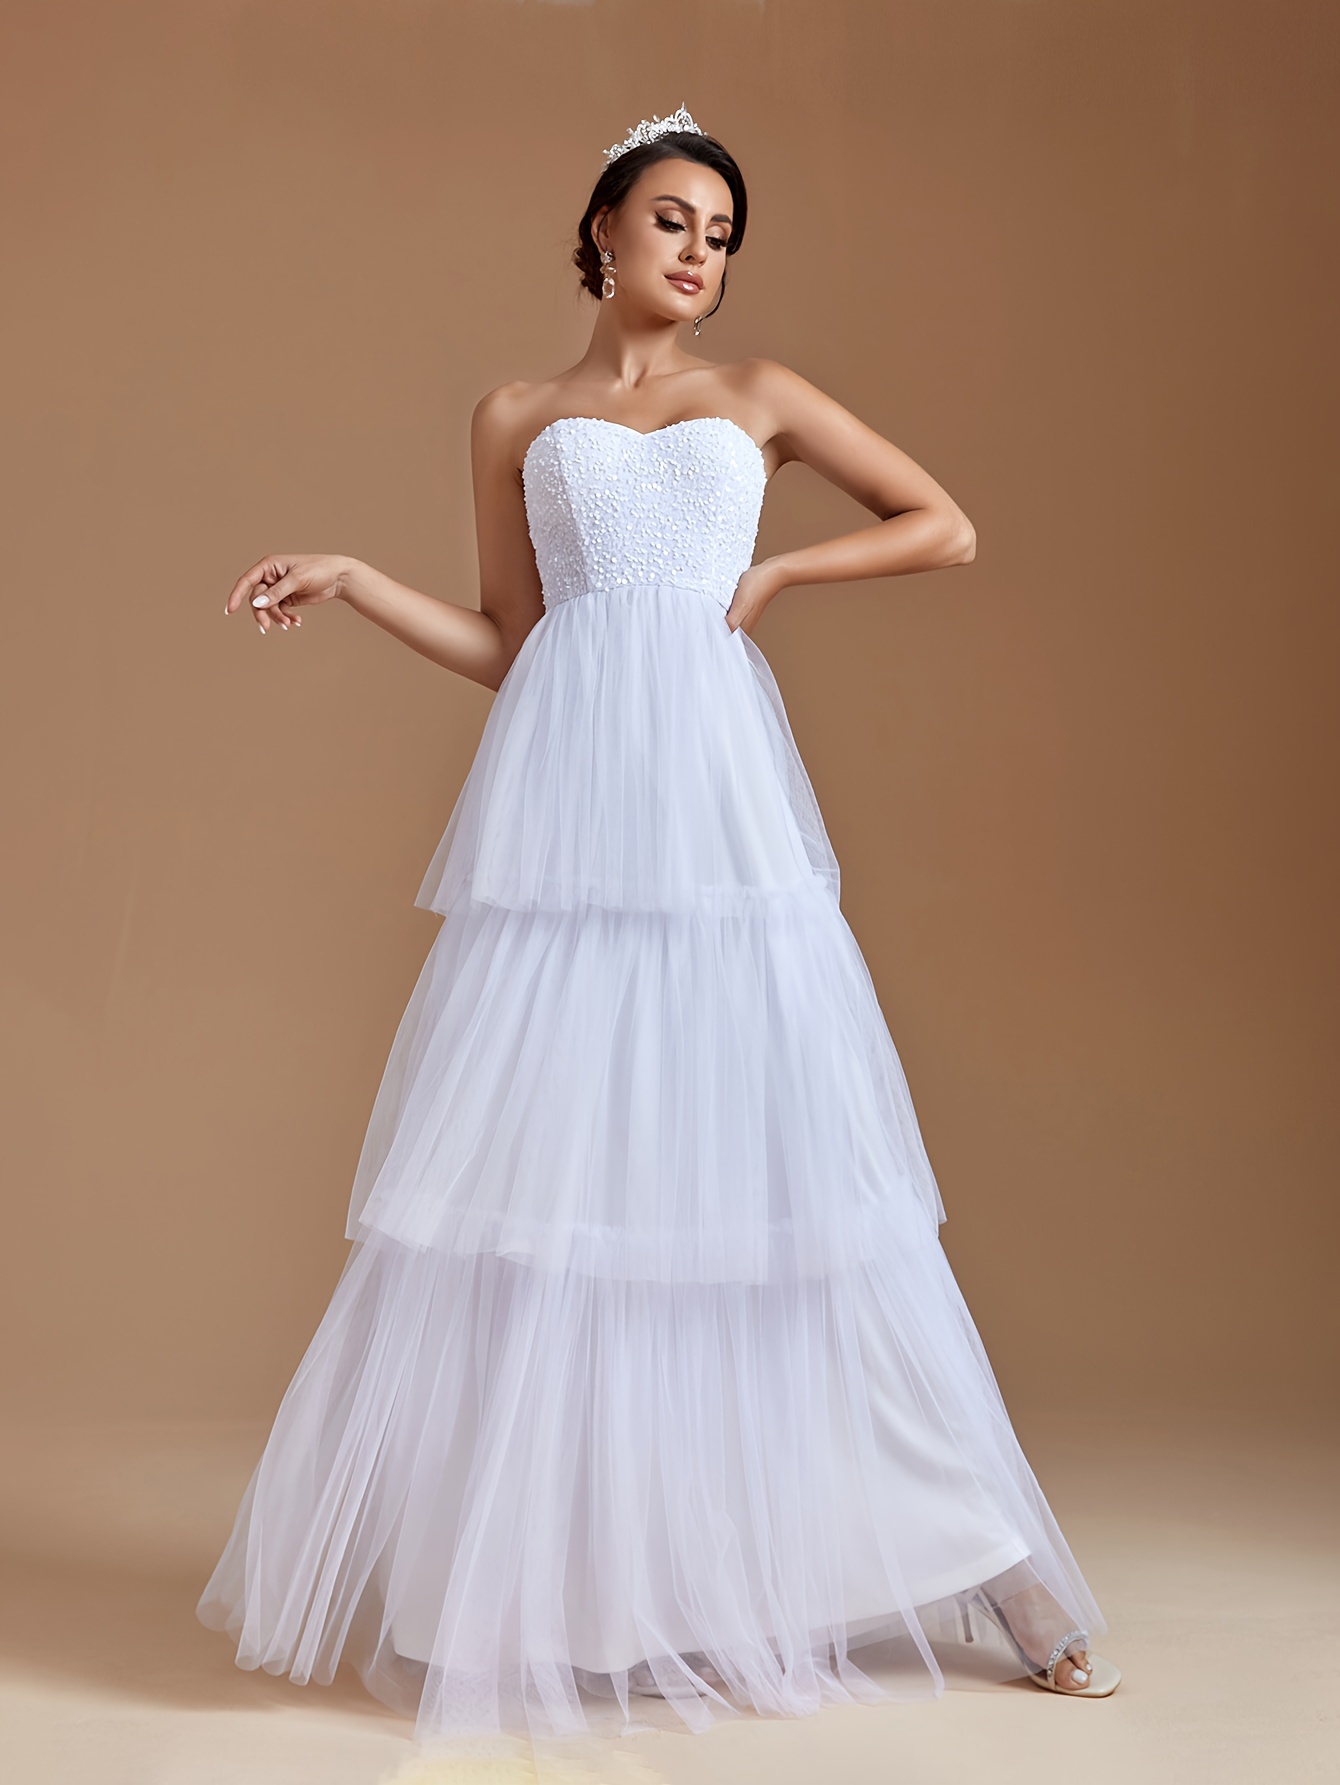 Women Fit And Flared Dress A-line Swing Elegant Strappy Sleeveless Cocktail  Dress For Wedding